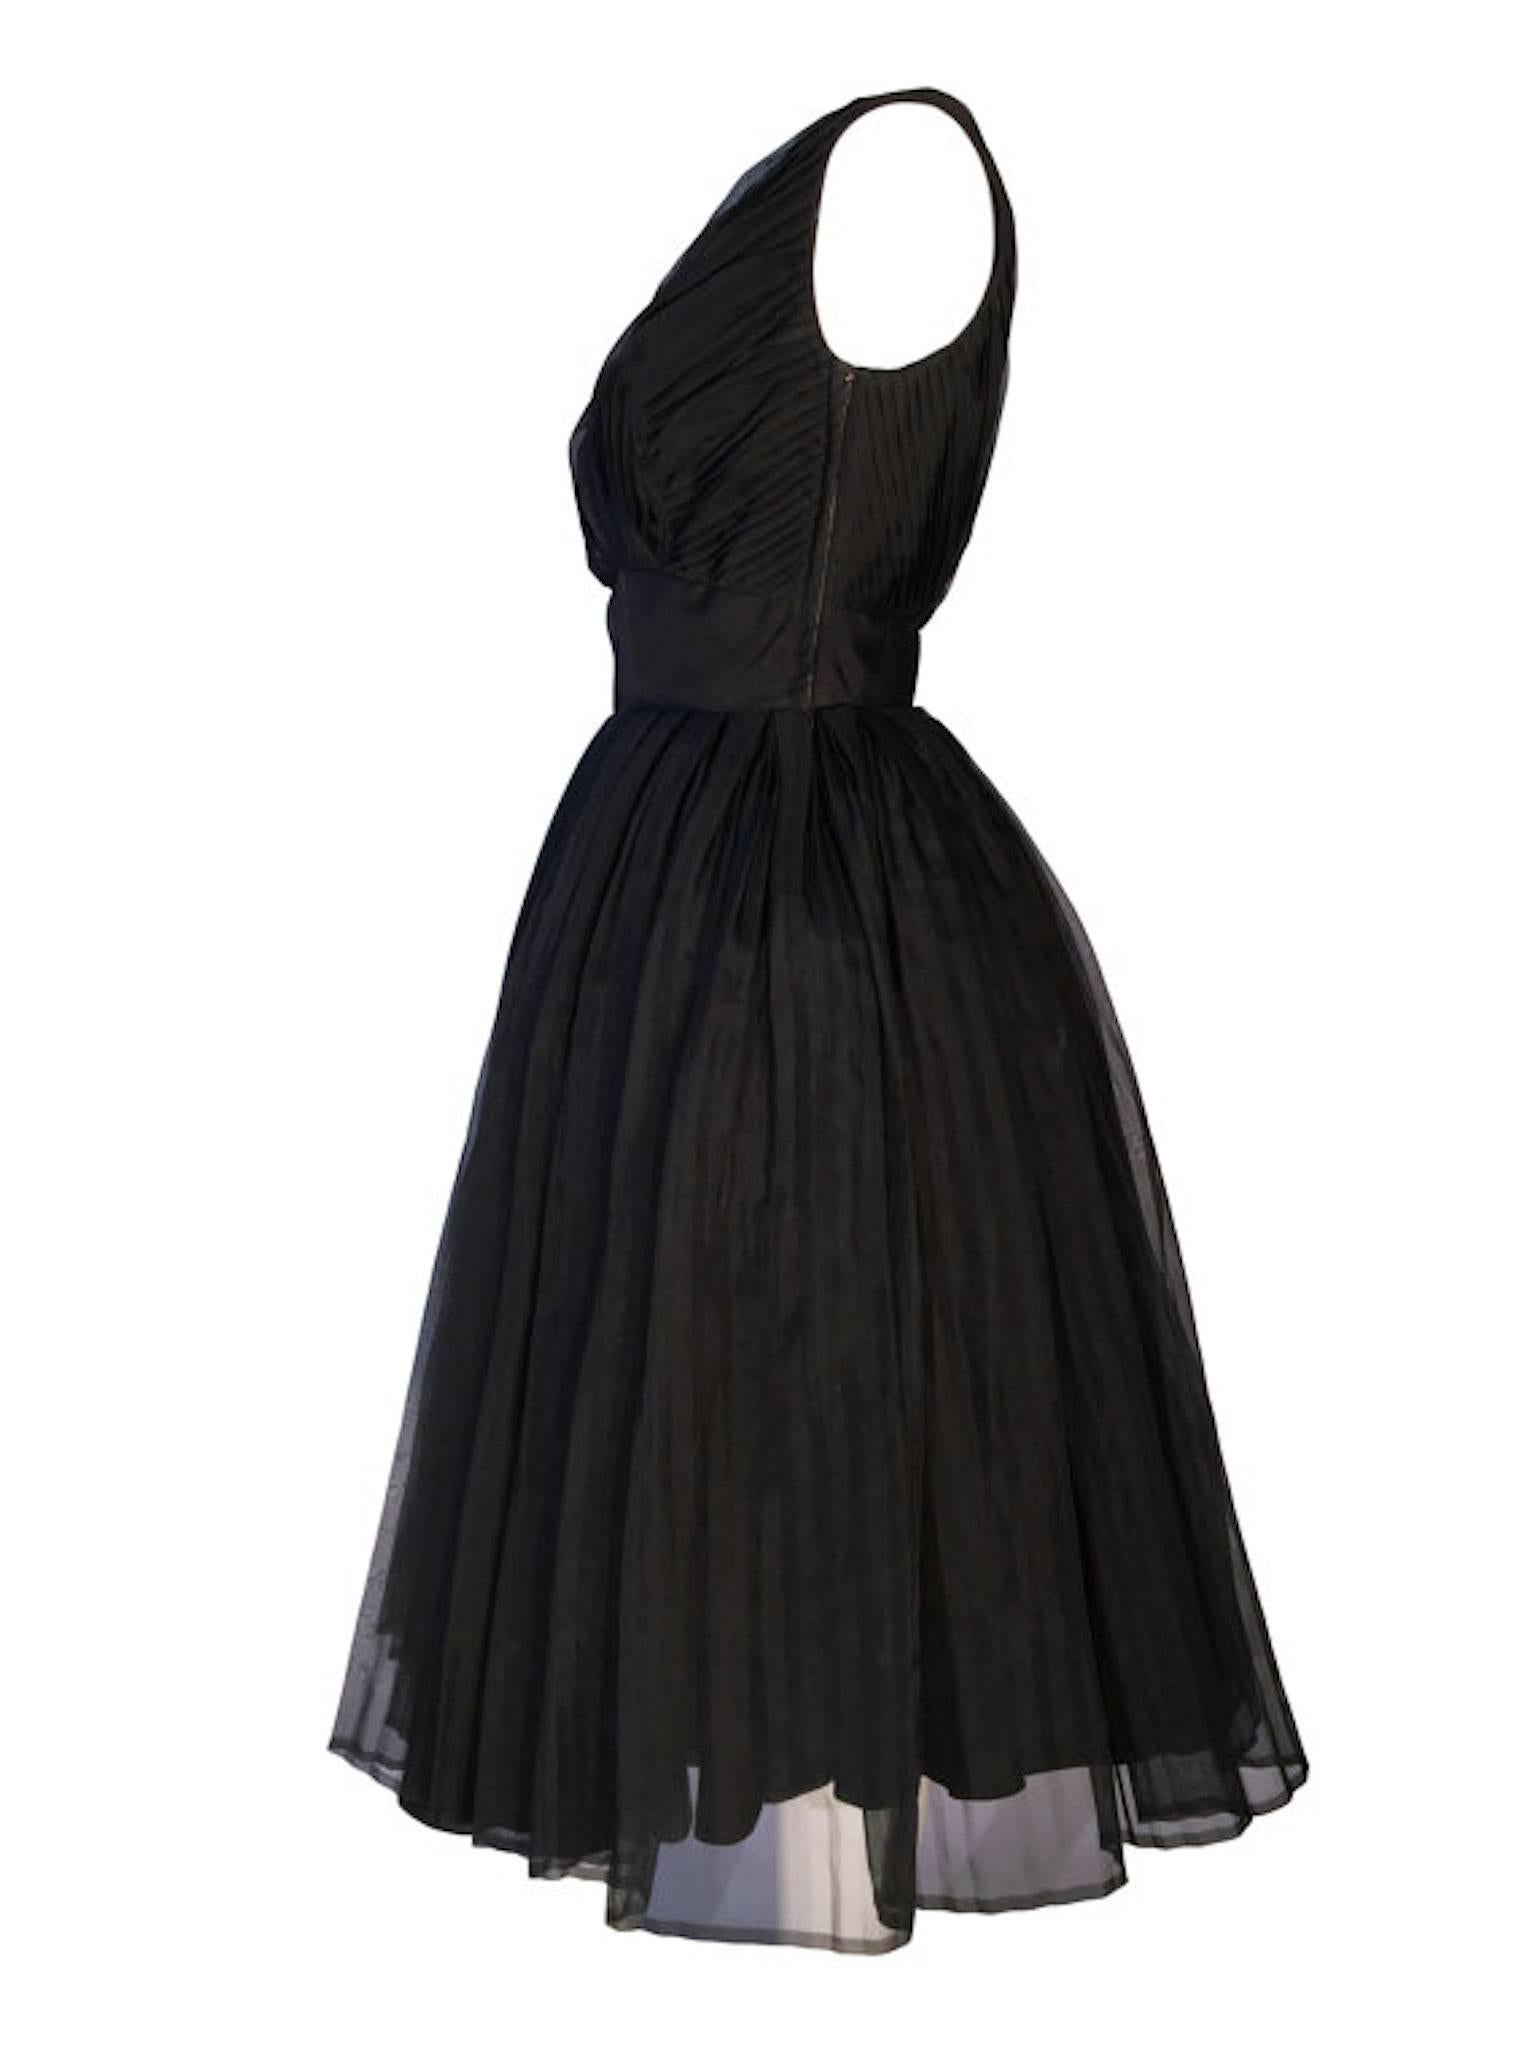 Jean Allen Early 1960's black chiffon fit and flare evening cocktail dress. Skirt constructed of 5 layers of different materials to give volume. Fastens at the left side with a metal zip.

Size UK 8/10 measures just under 18 inches across bust, 14